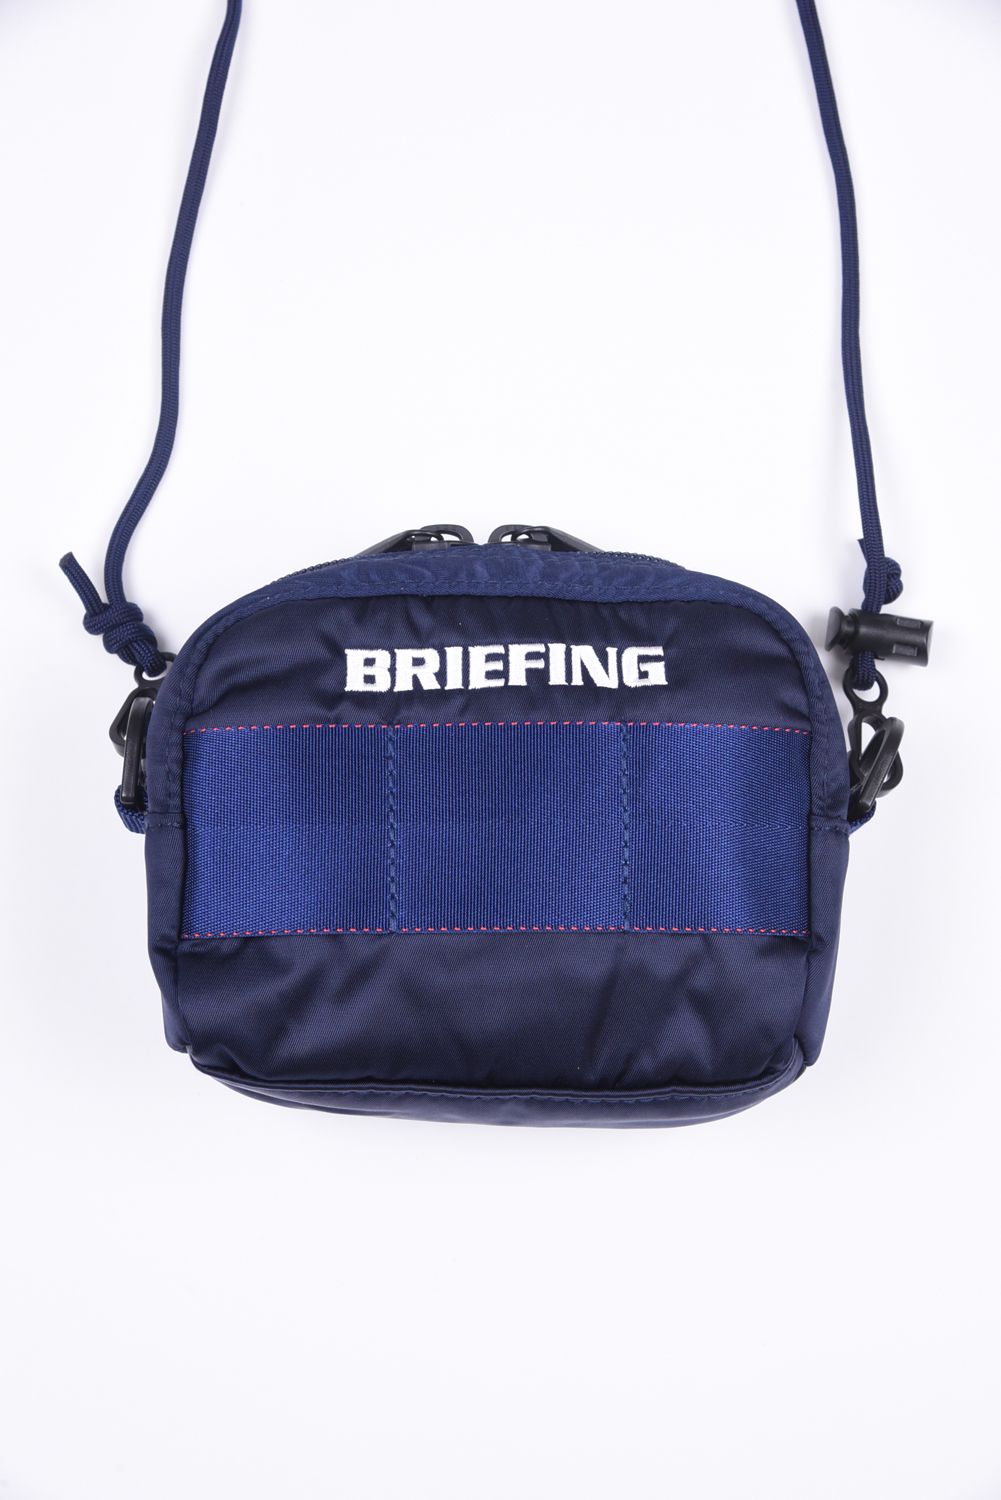 BRIEFING - 【エコツイル】 3WAY POUCH GOLF ECO TWILL 